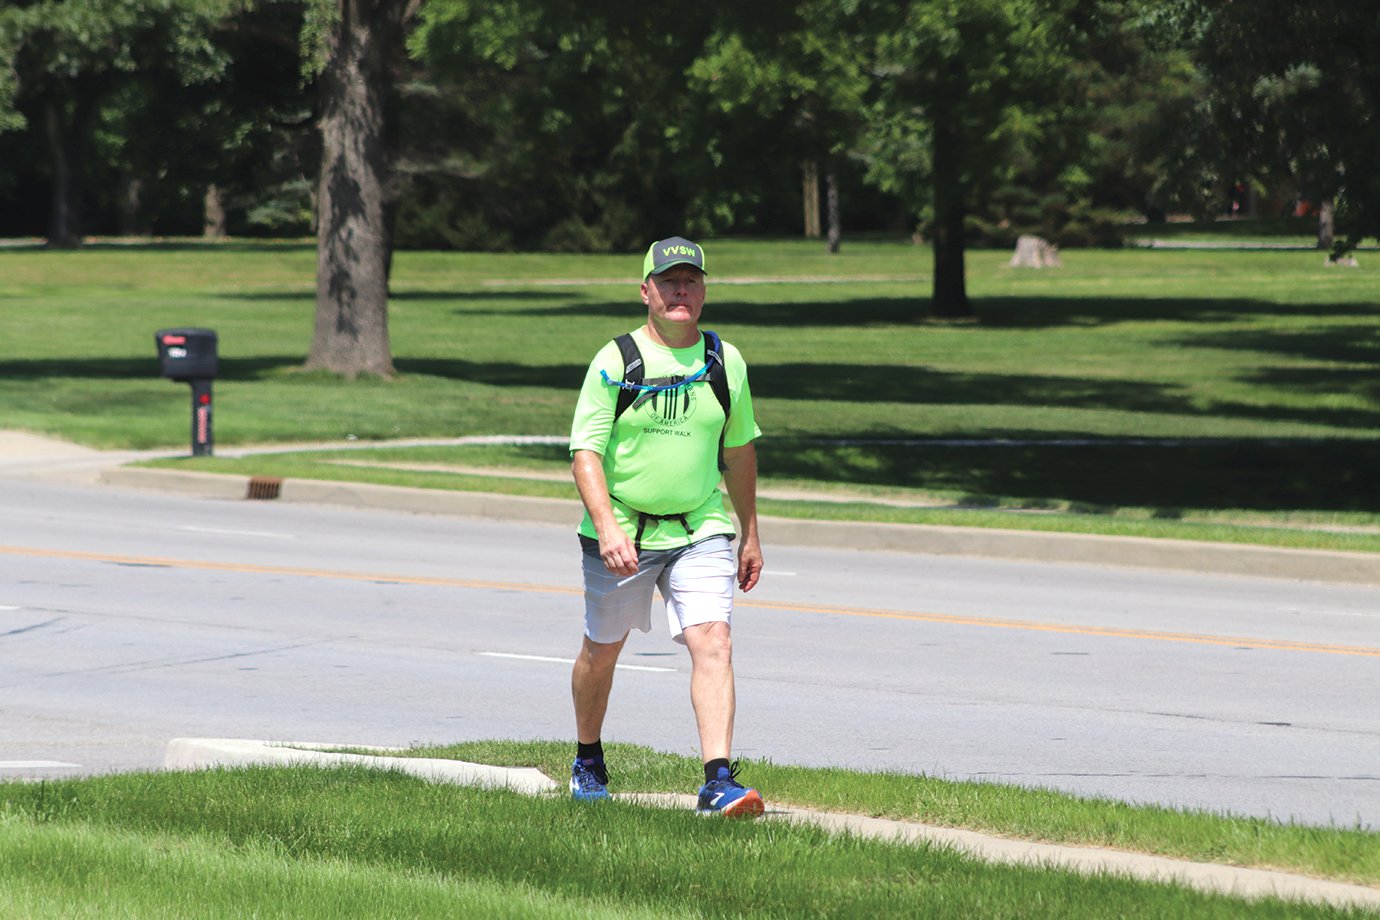 Scott Laughlin, a 1989 Crawfordsville HIgh School graduate, Gulf War veteran and son of Vietnam veteran David Laughlin, arrives at the American Legion in Crawfordsville on Saturday after walking nearly 30 miles from his Lafayette residence. Laughlin is training for a Vietnam Veterans Support Walk this April, in which he will trek nearly 2,500 miles from South Carolina to San Diego to raise funds and awareness for Vietnam veterans.